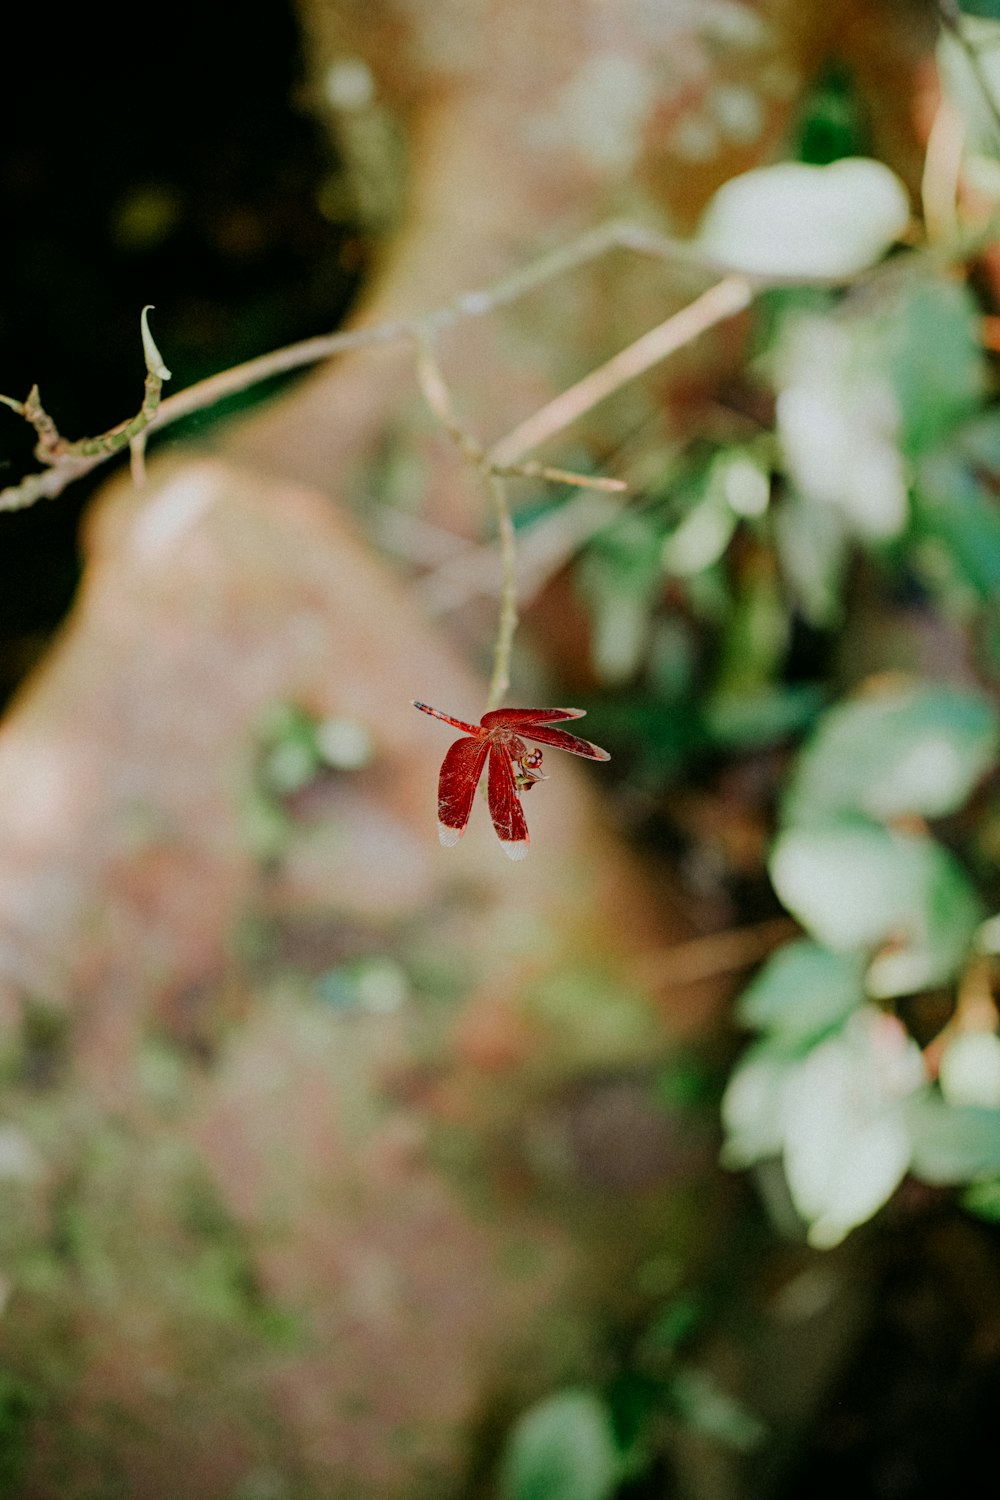 a red leaf hanging from a tree branch